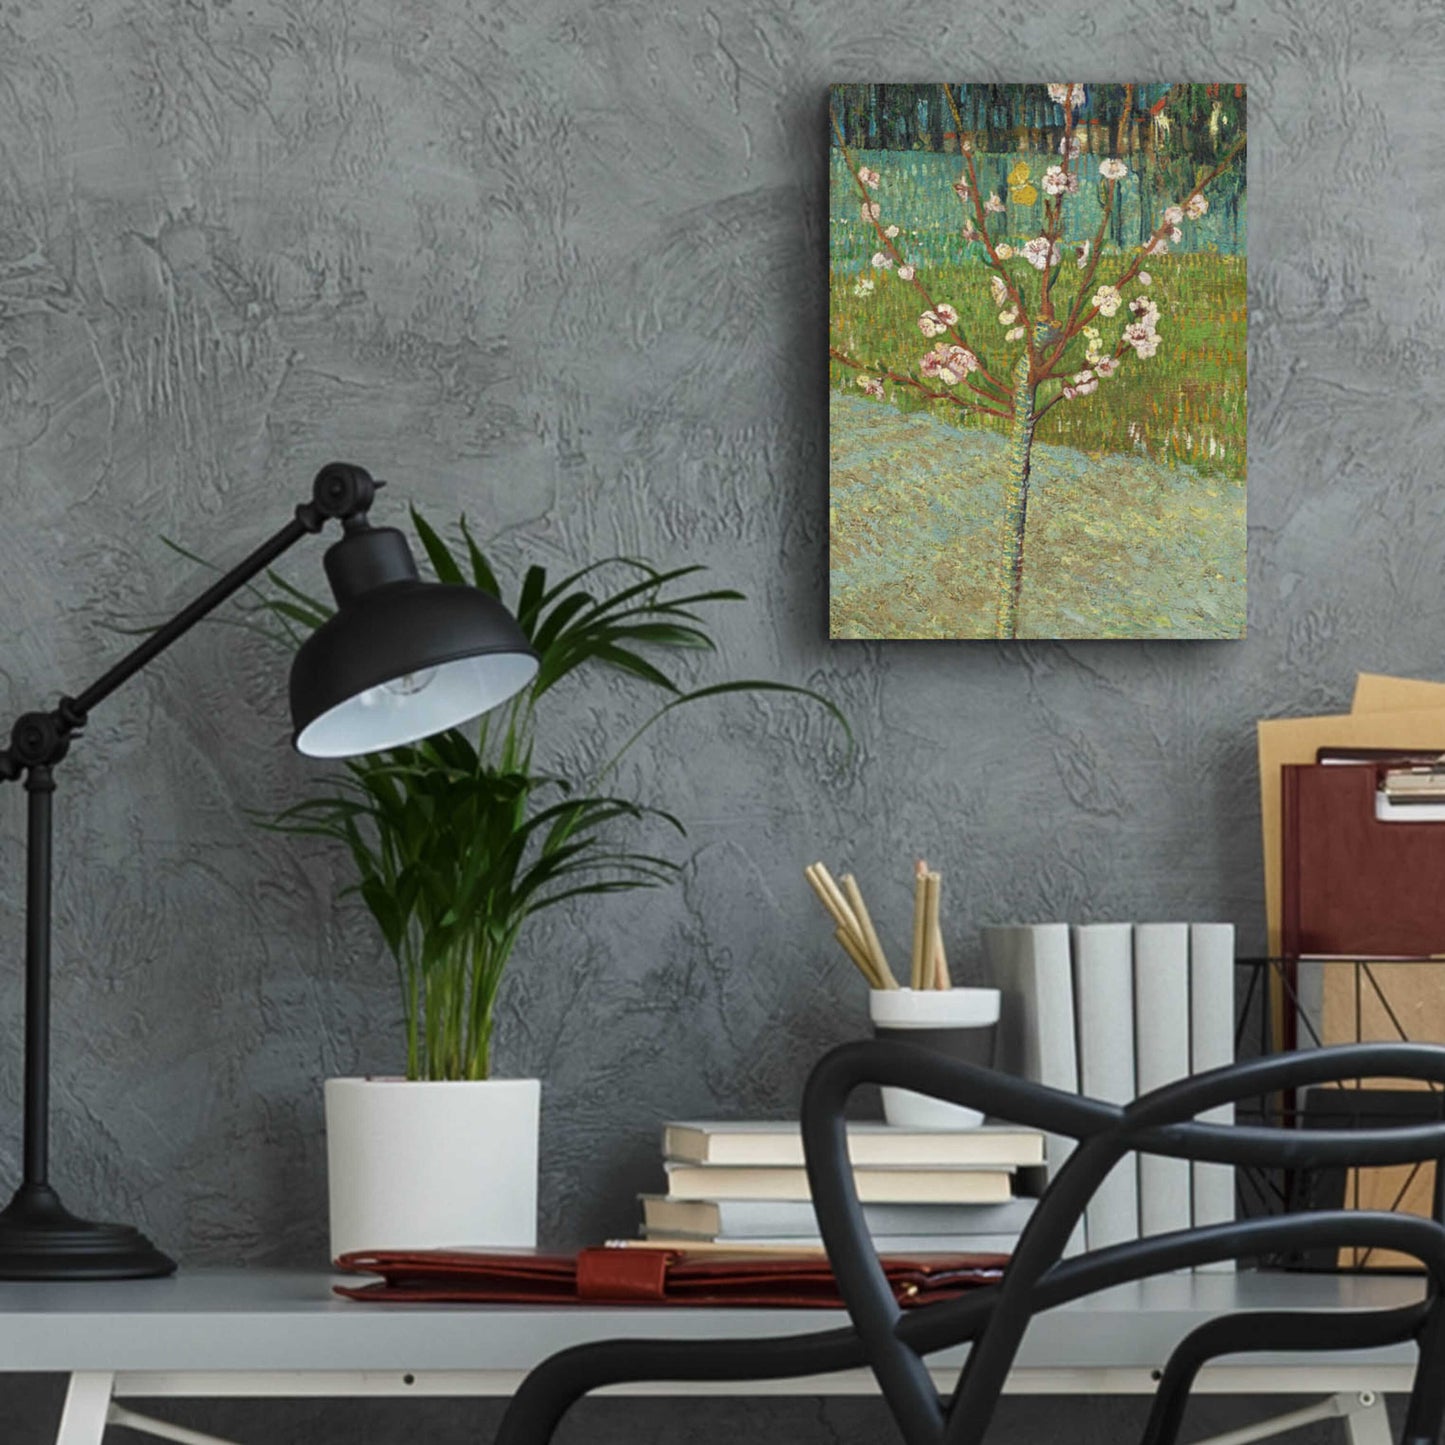 Epic Art 'Peach Tree In Blossom' by Vincent Van Gogh, Acrylic Glass Wall Art,12x16